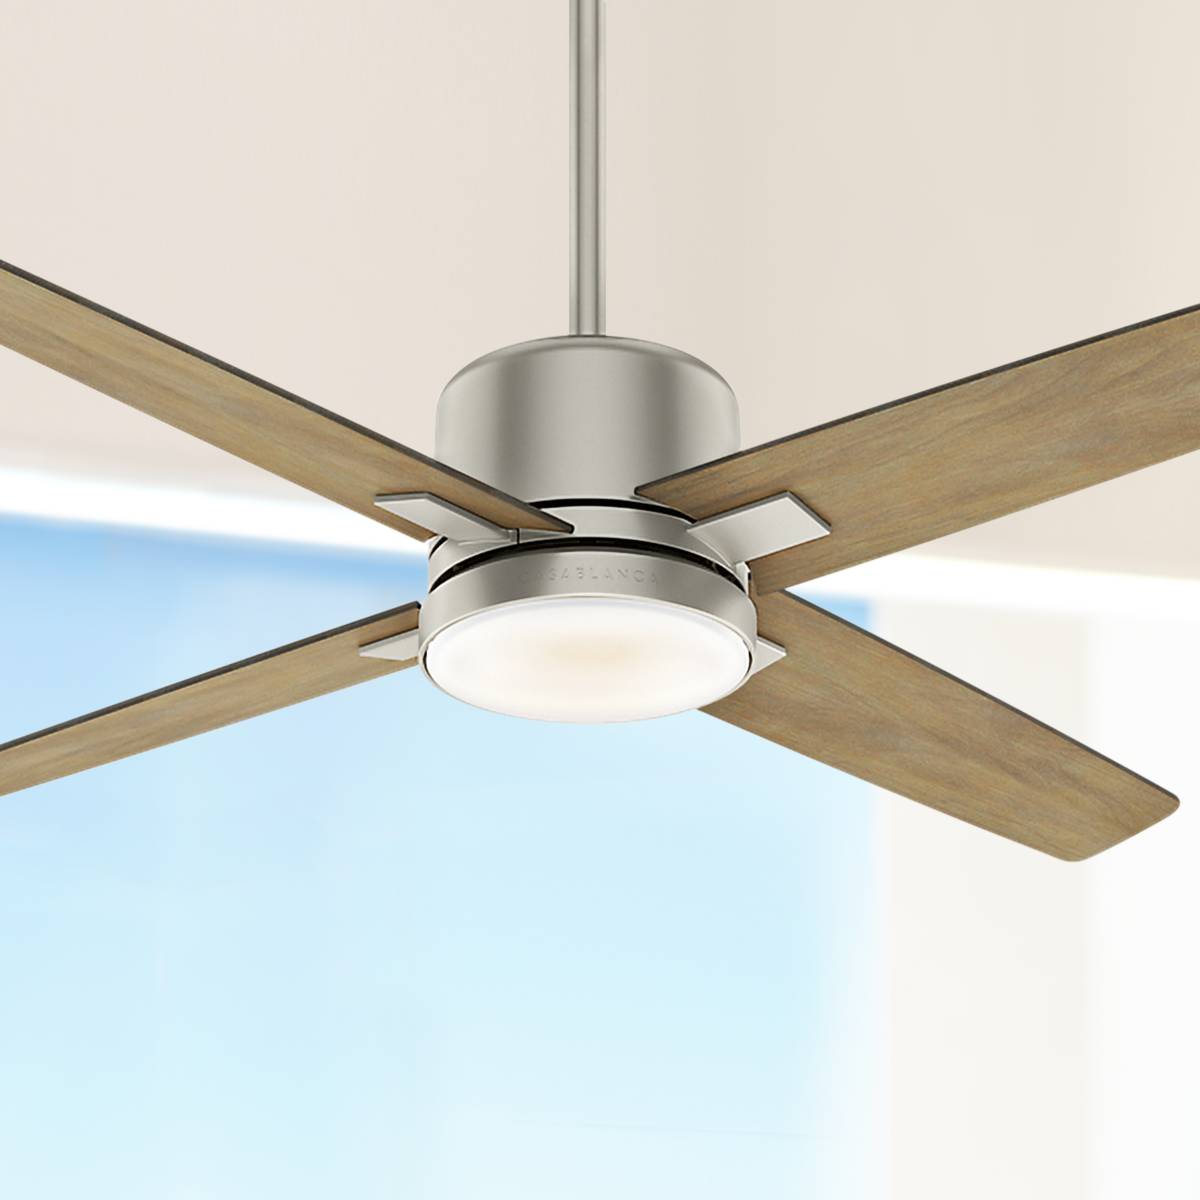 Ceiling Fan With Light Kit, Wall Control Ceiling Fans - Page 2 | Lamps Plus